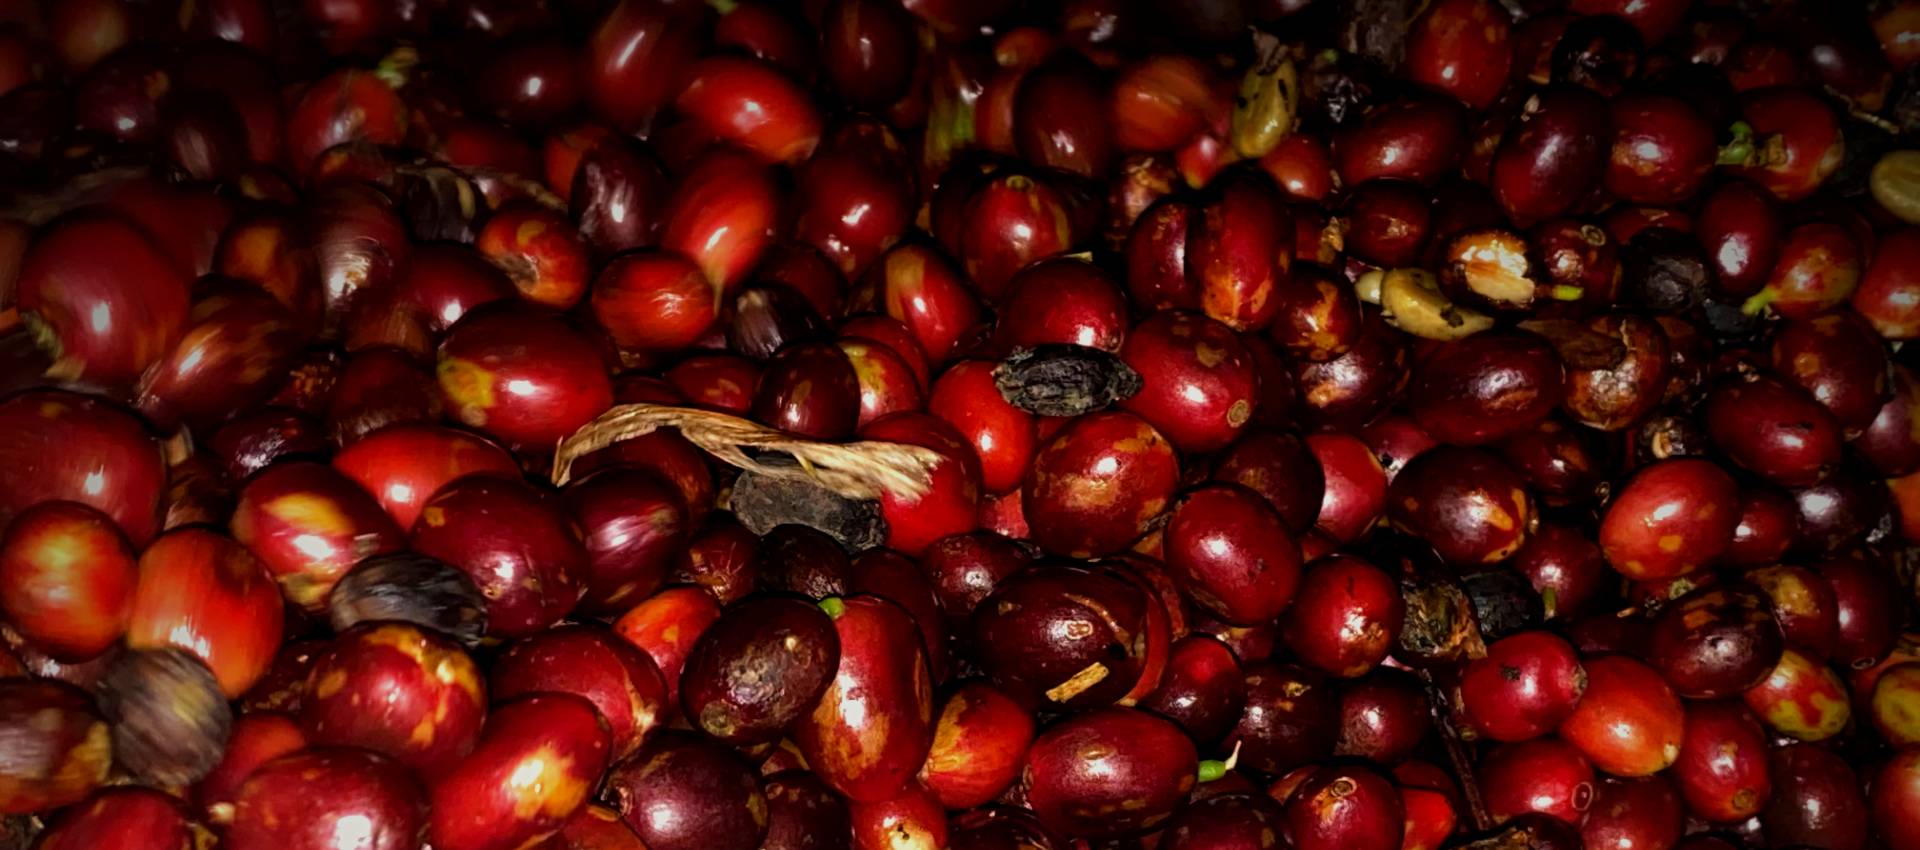 What is Shade-Grown Coffee?